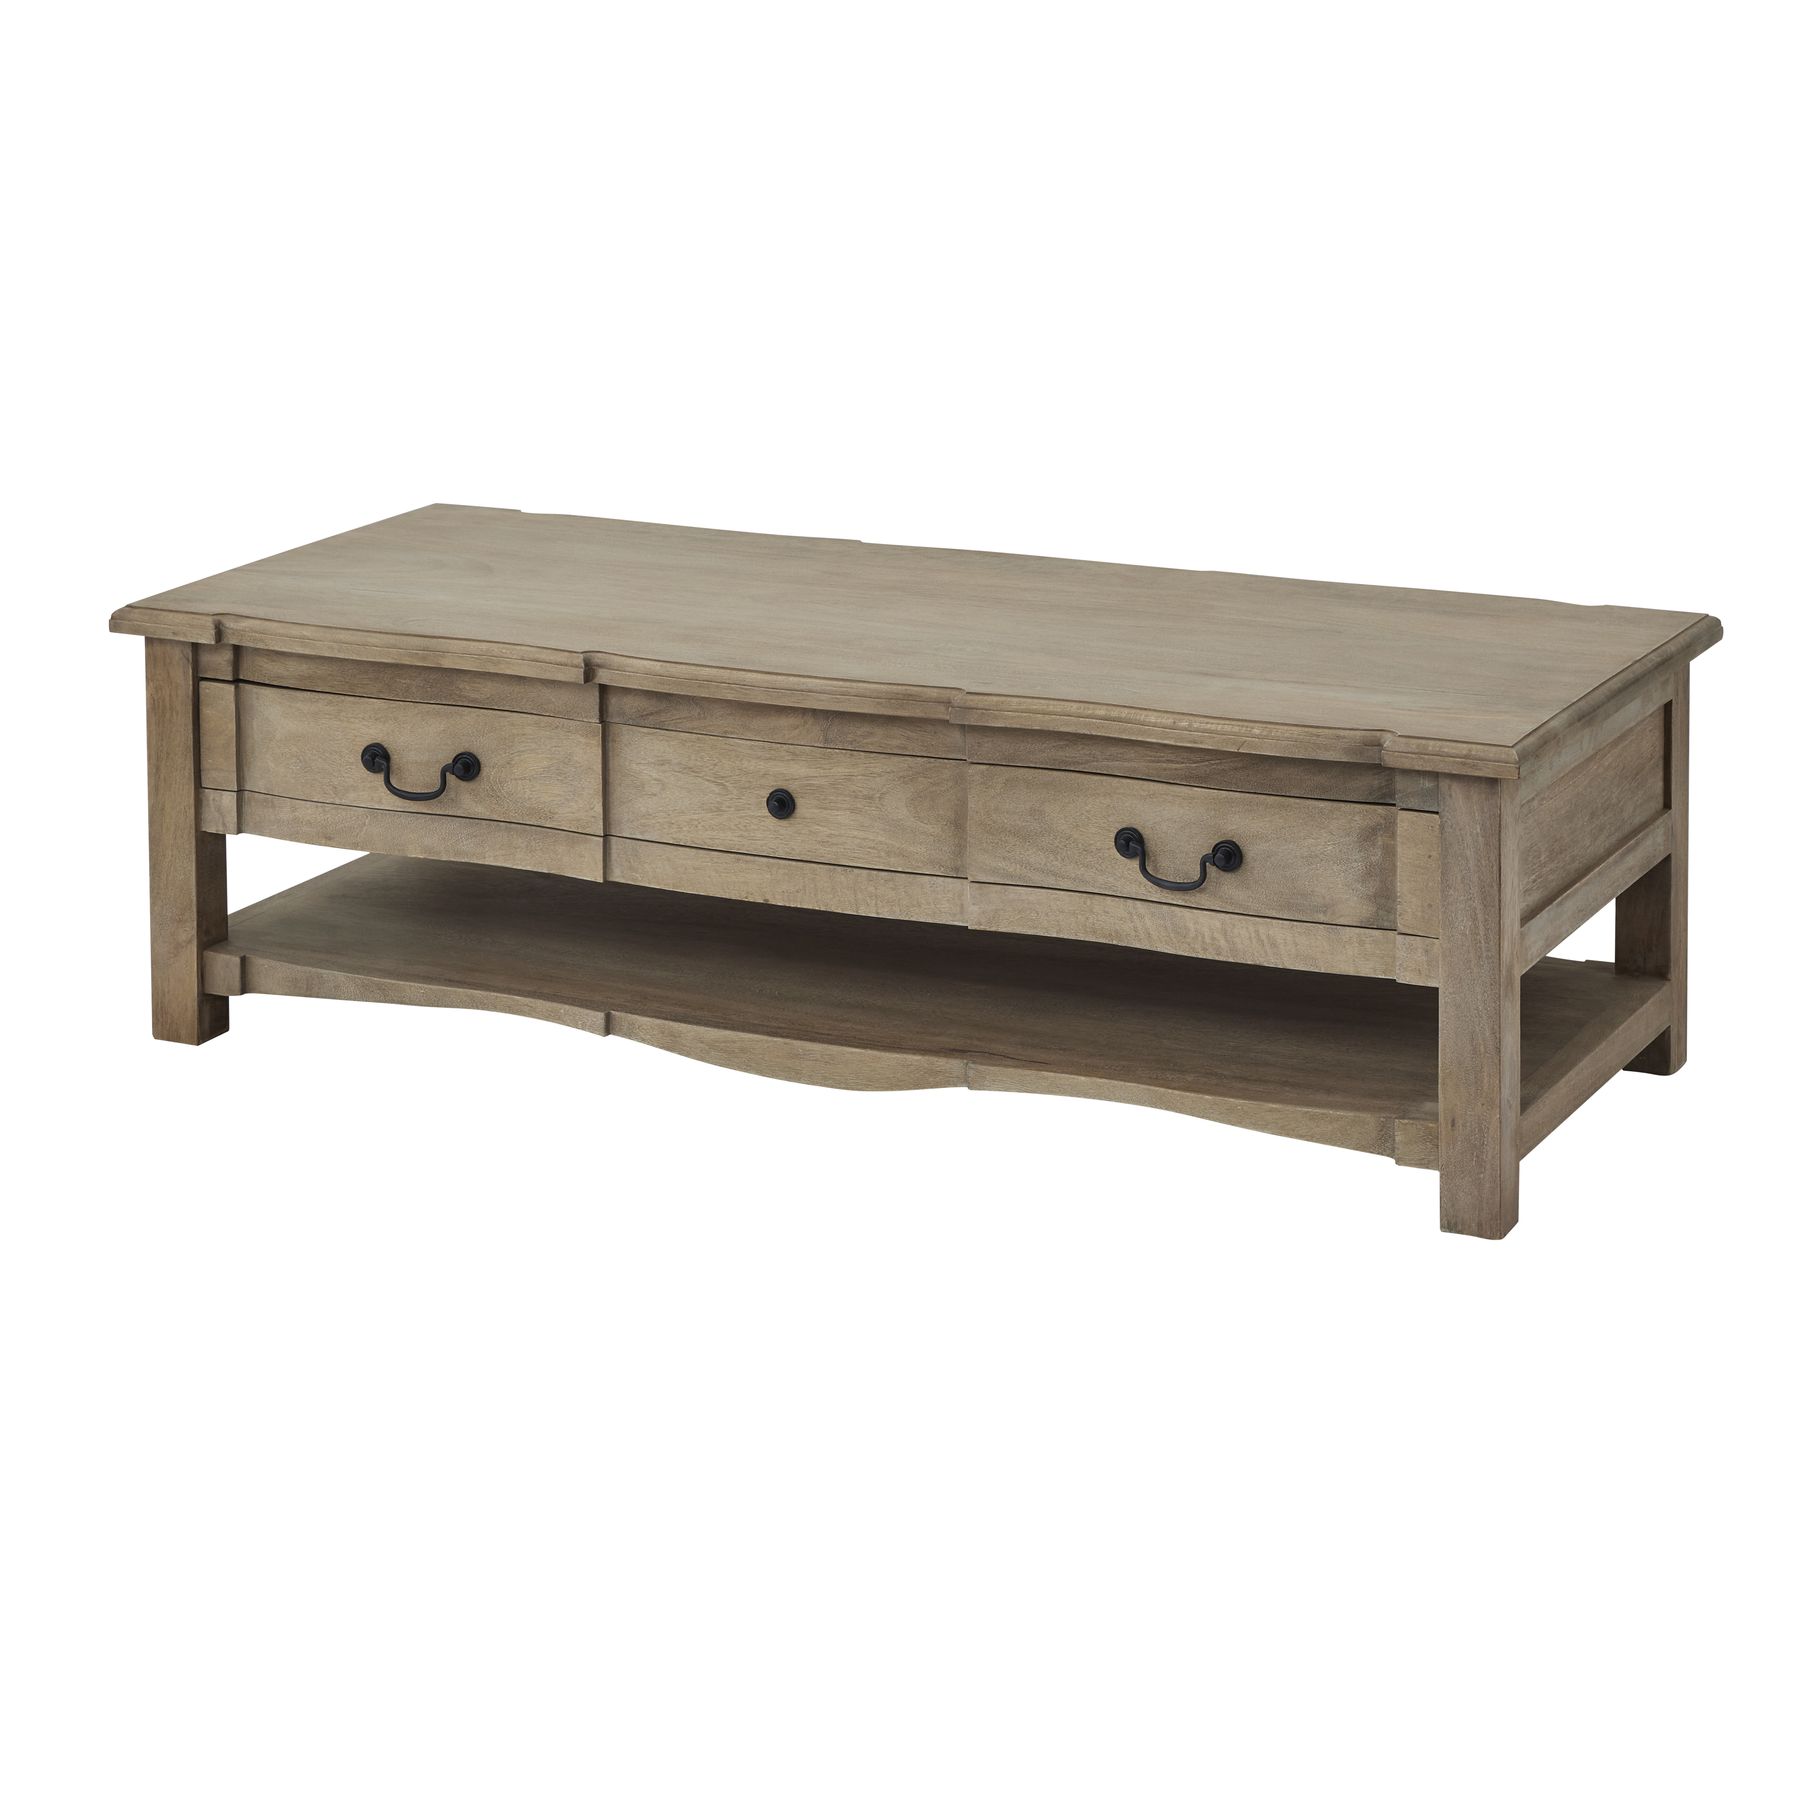 Copgrove Collection 2 Drawer Coffee Table - Image 1